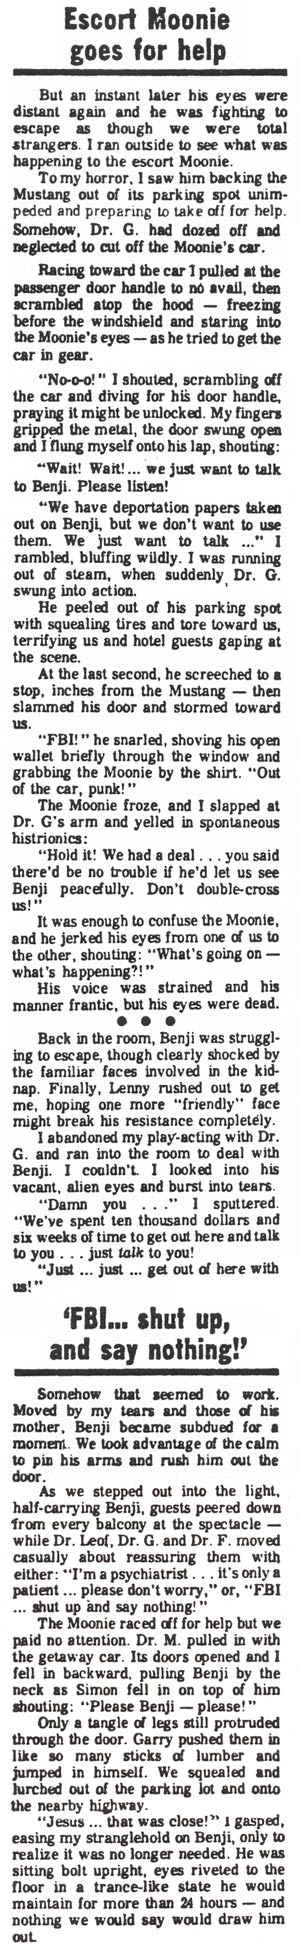 The Montreal Star Tuesday, January 4, 1978 The Moon Stalkers